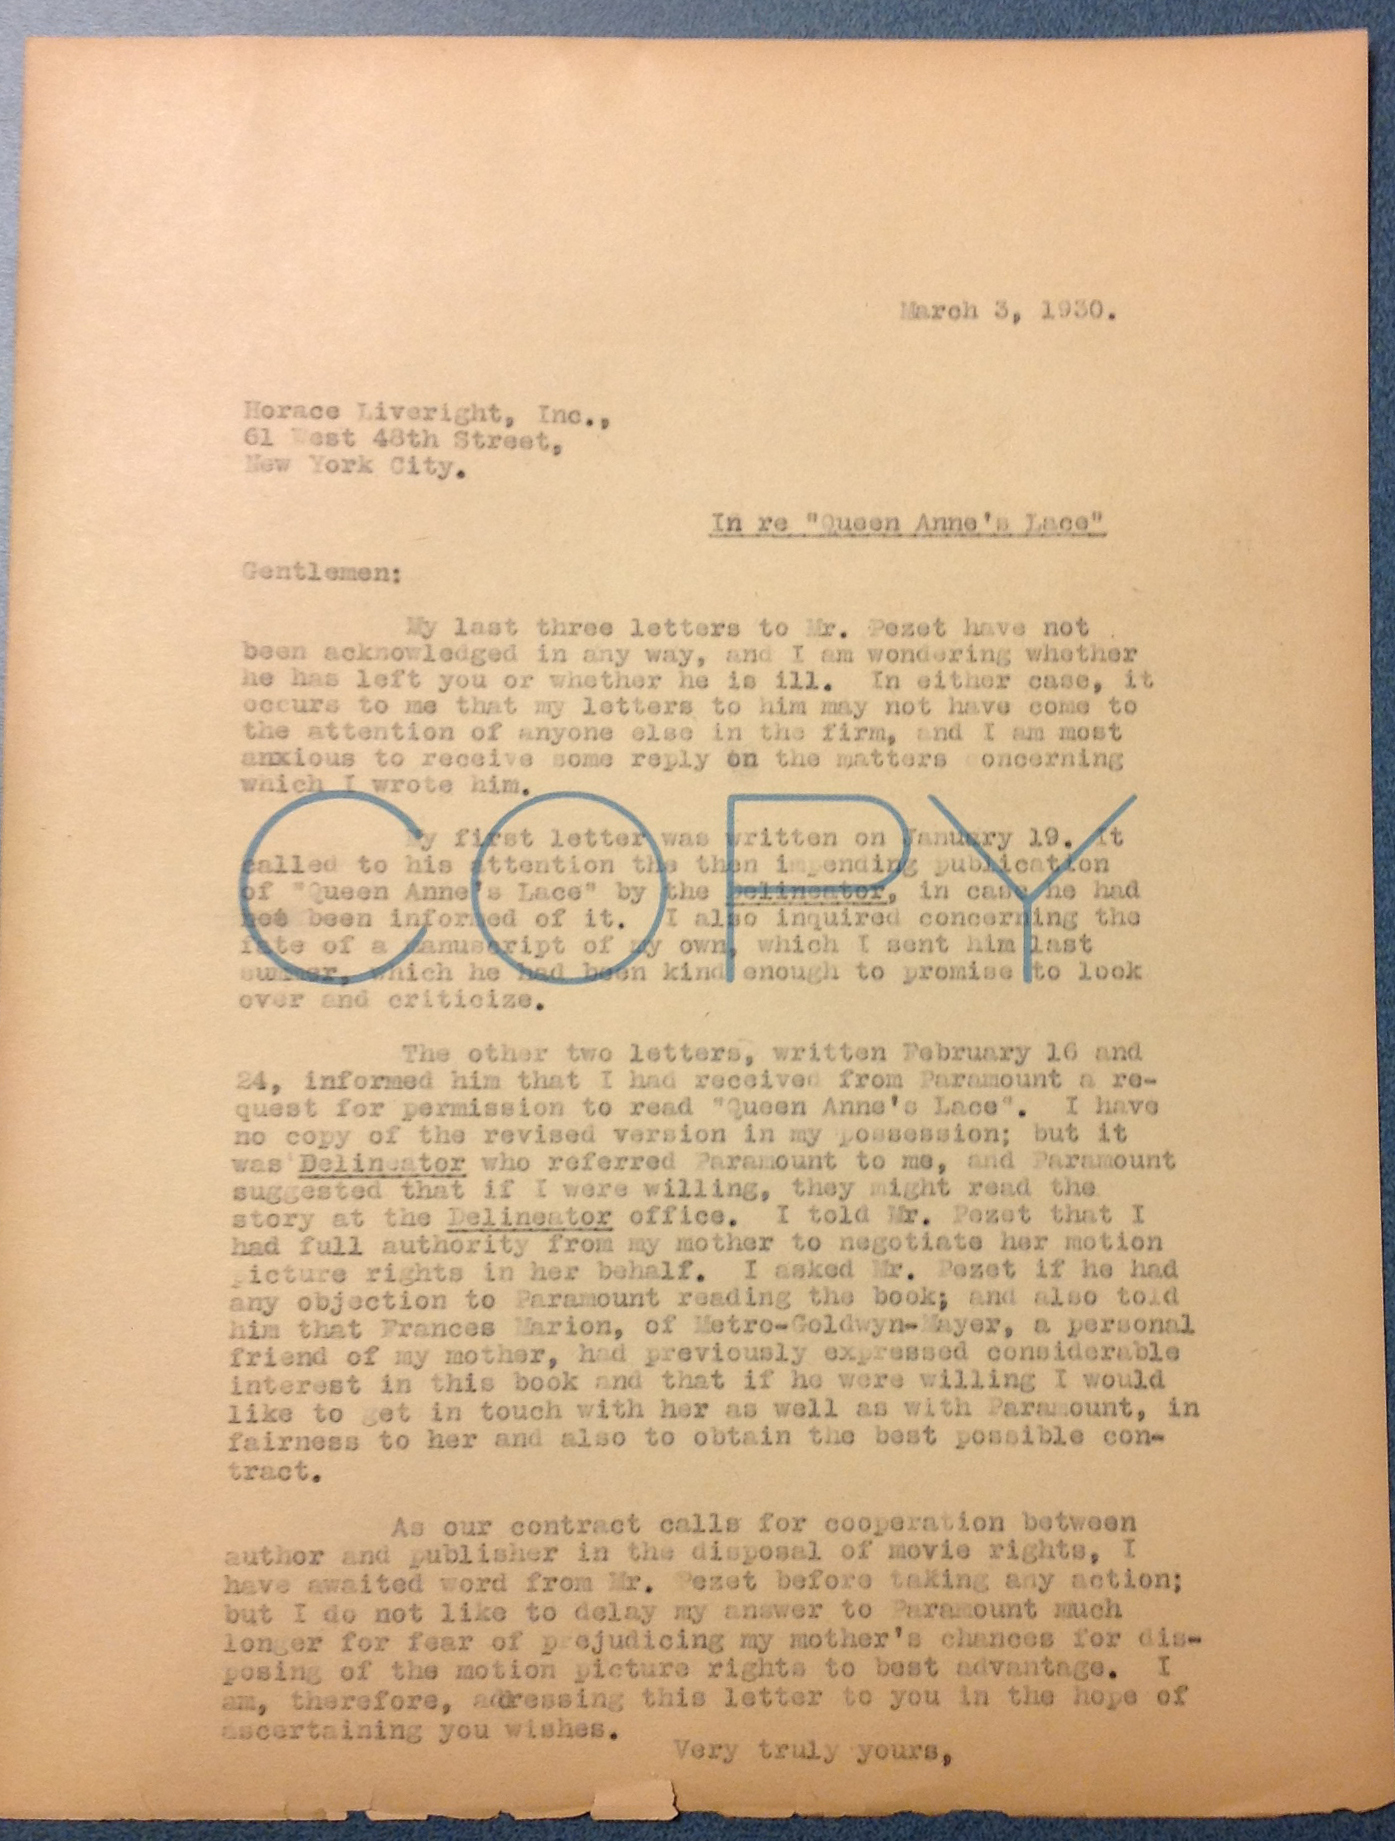 Henry W. Keyes Jr. to Horace Liveright Inc., March 3, 1930